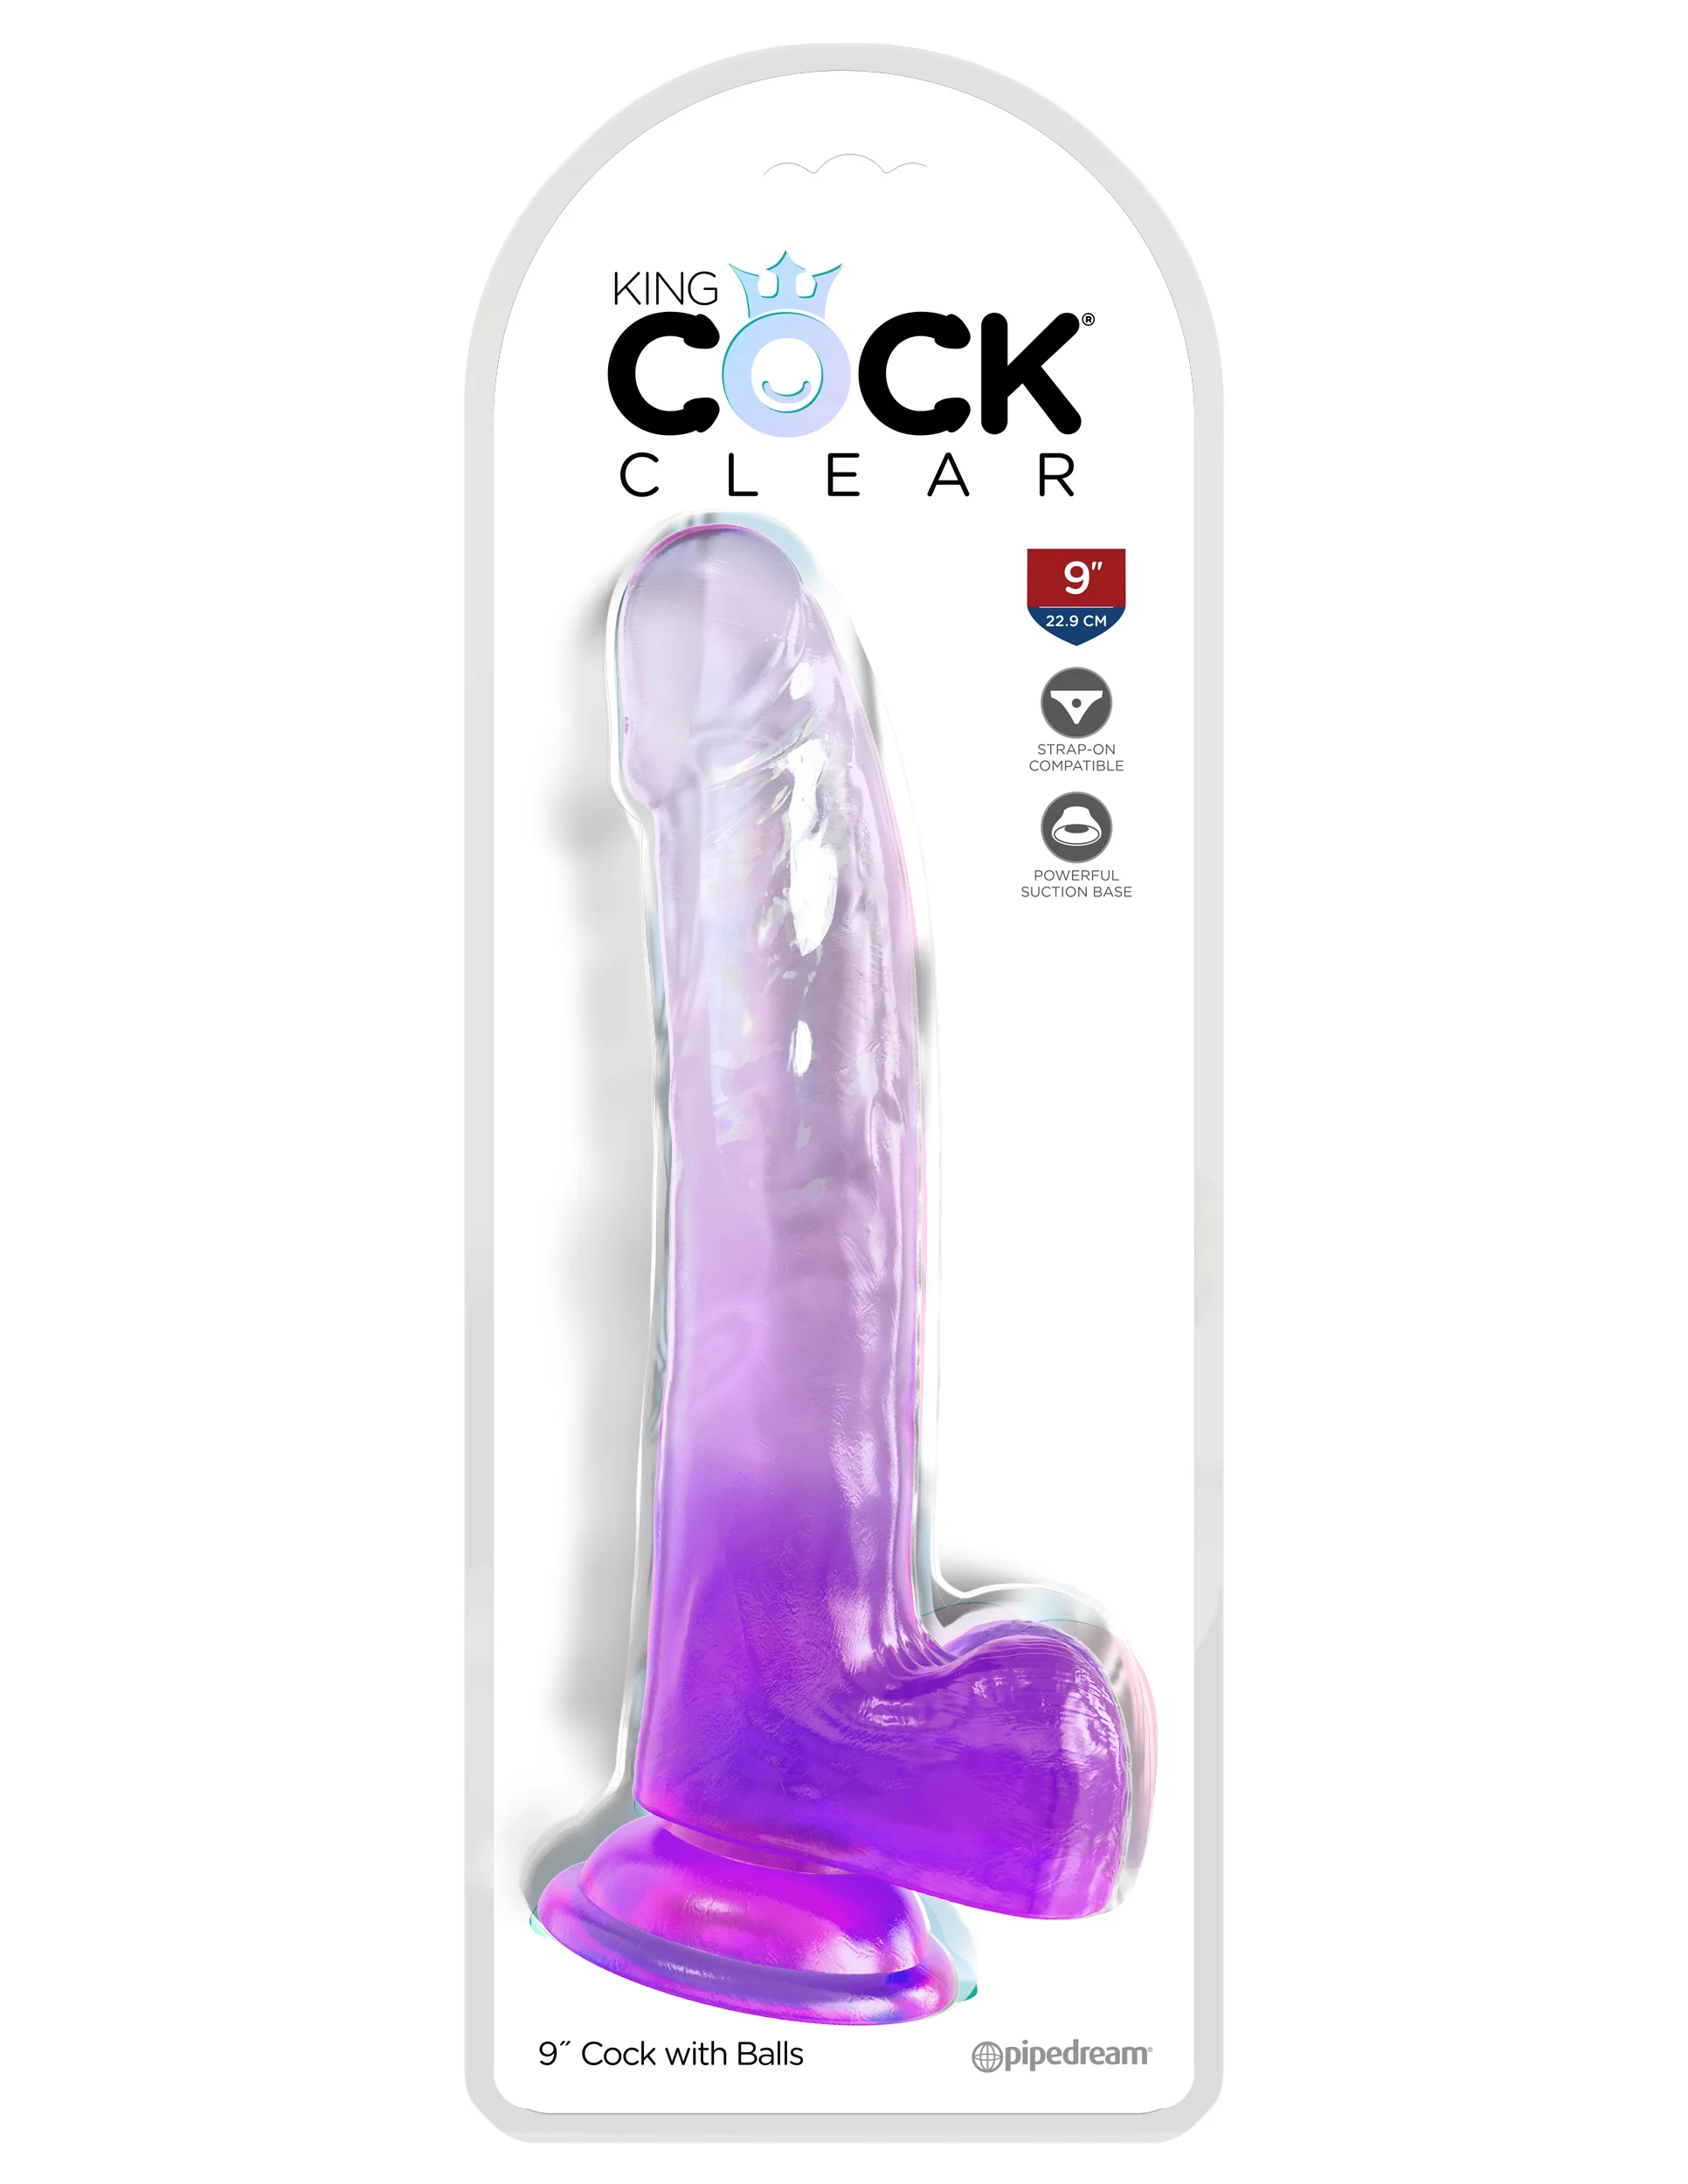     King Cock Clear 9, 